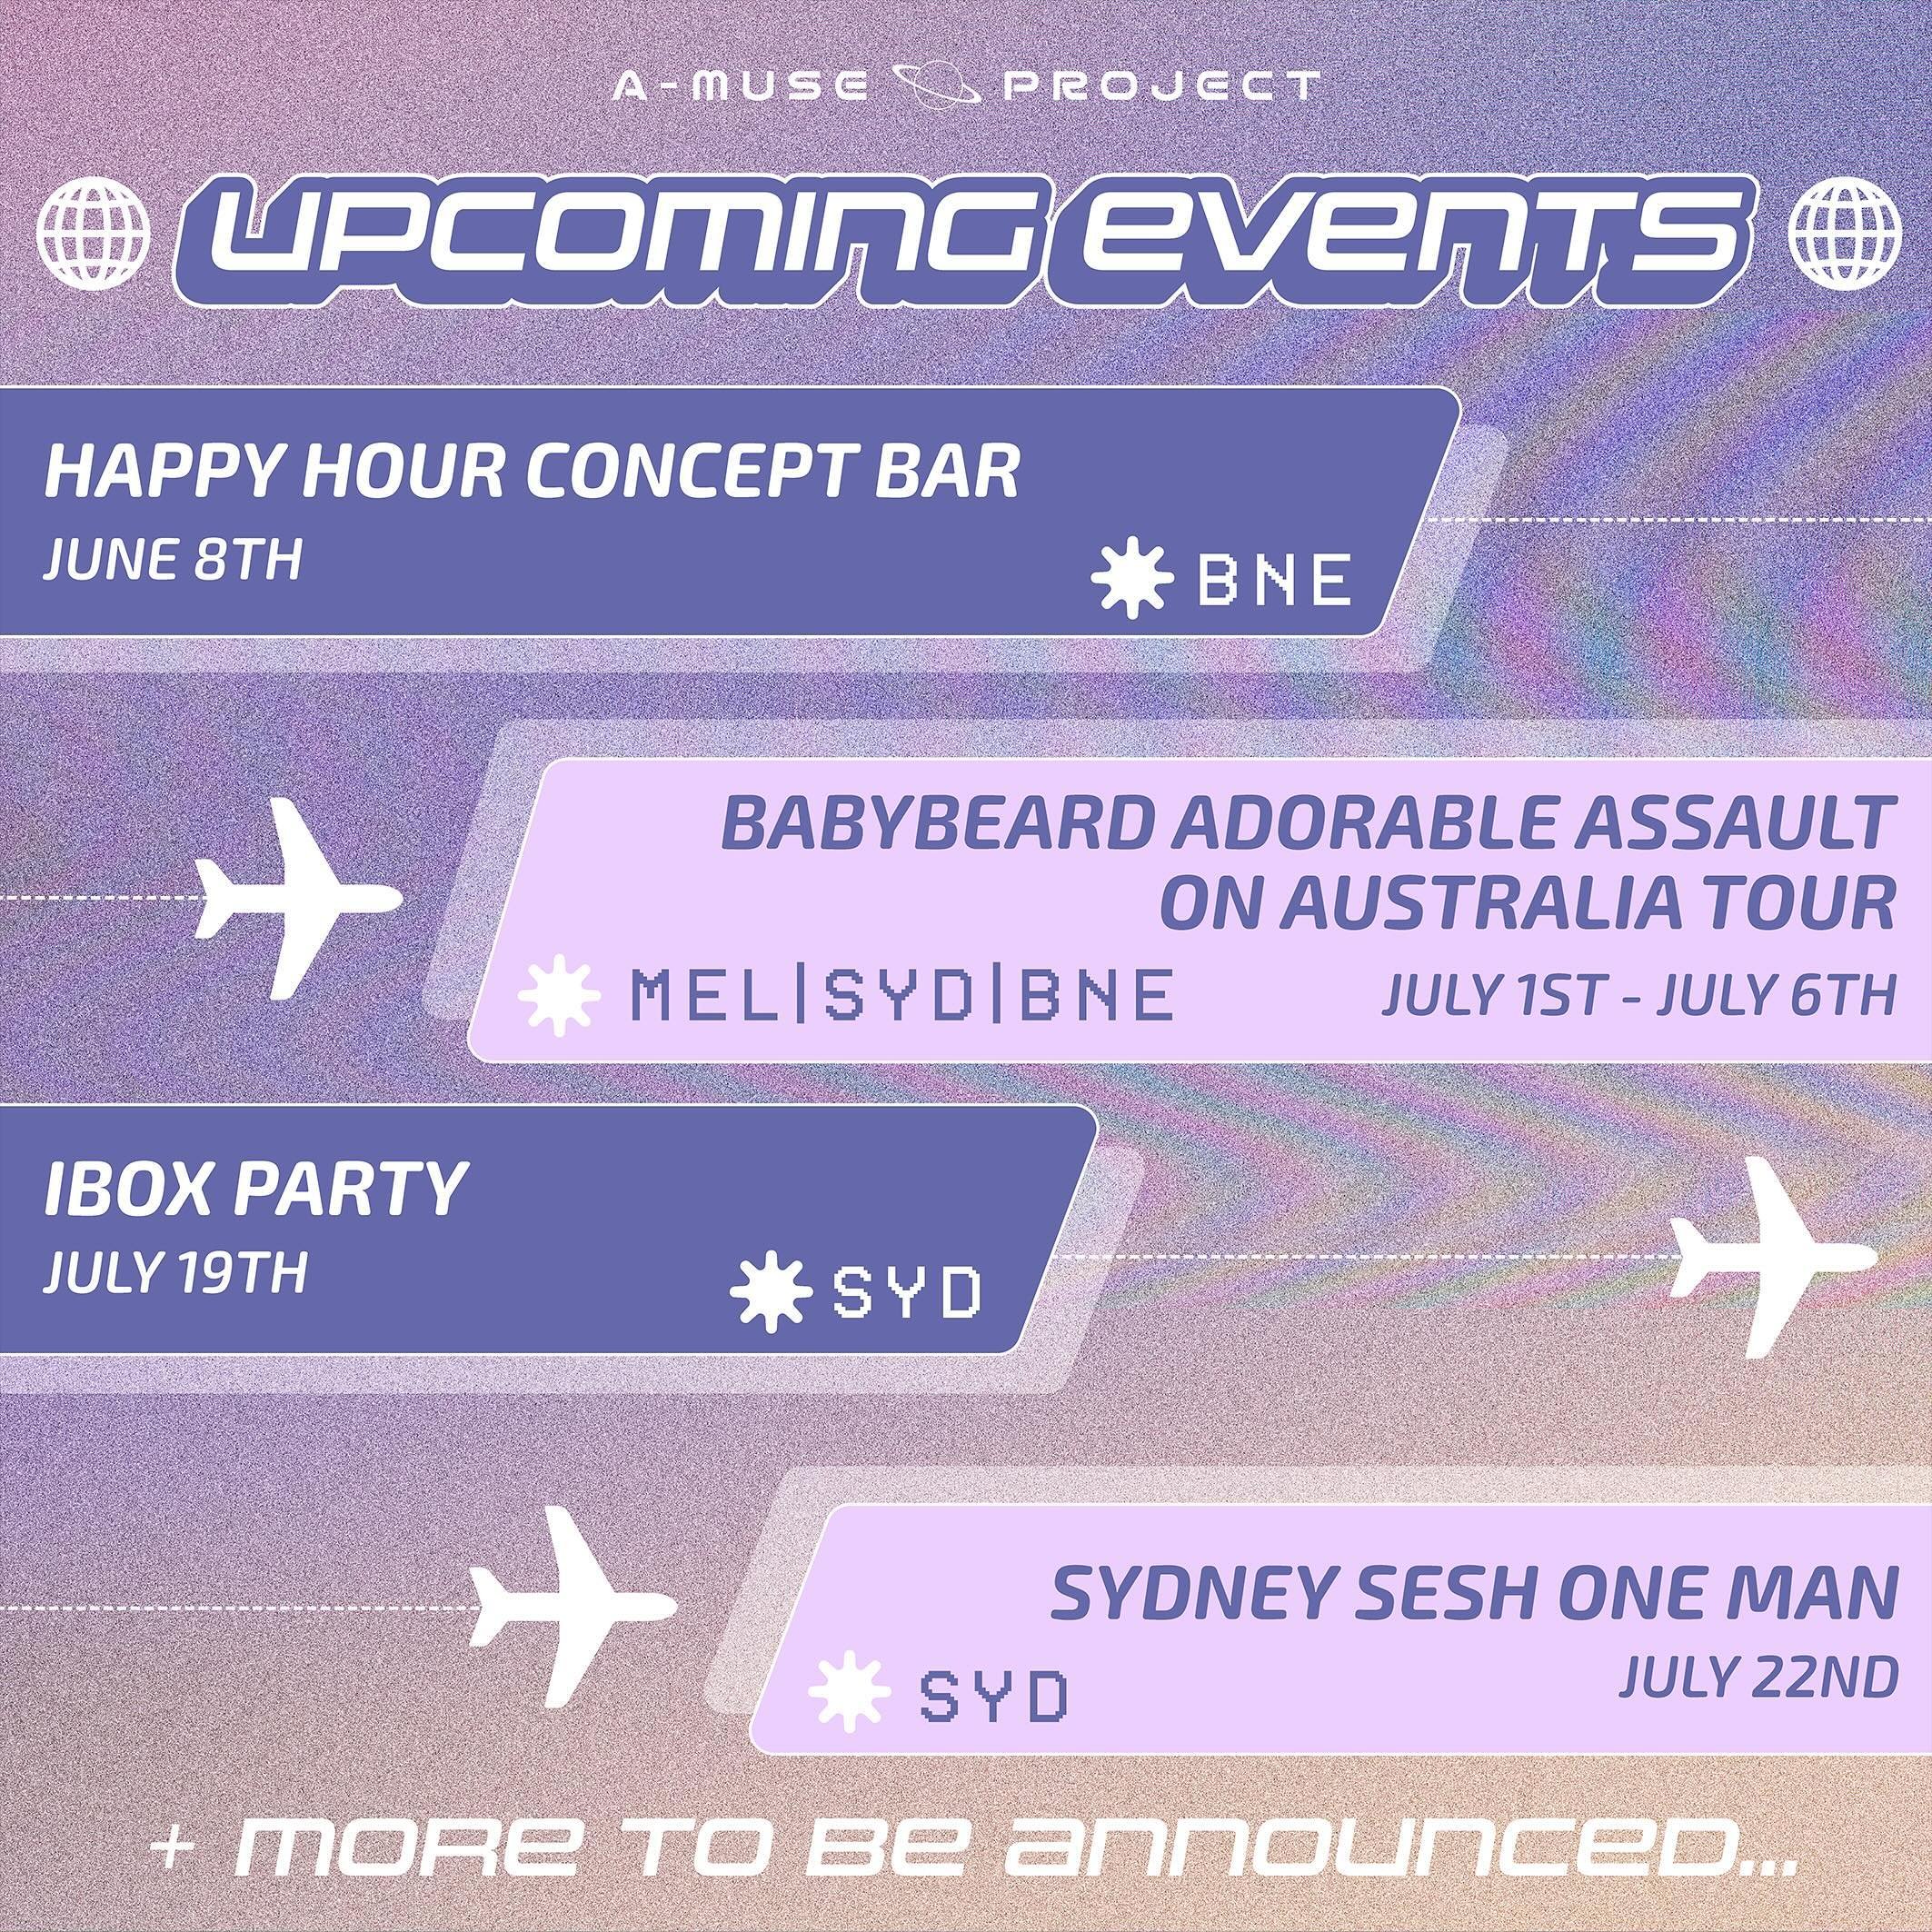 Mark your calendars! We have so many exciting events on the horizon ✈️ 

We&rsquo;ll be performing in Brisbane, Melbourne, and Sydney over the coming months! Which city will we see you in? 😋

Tickets for all of these events are available in our link